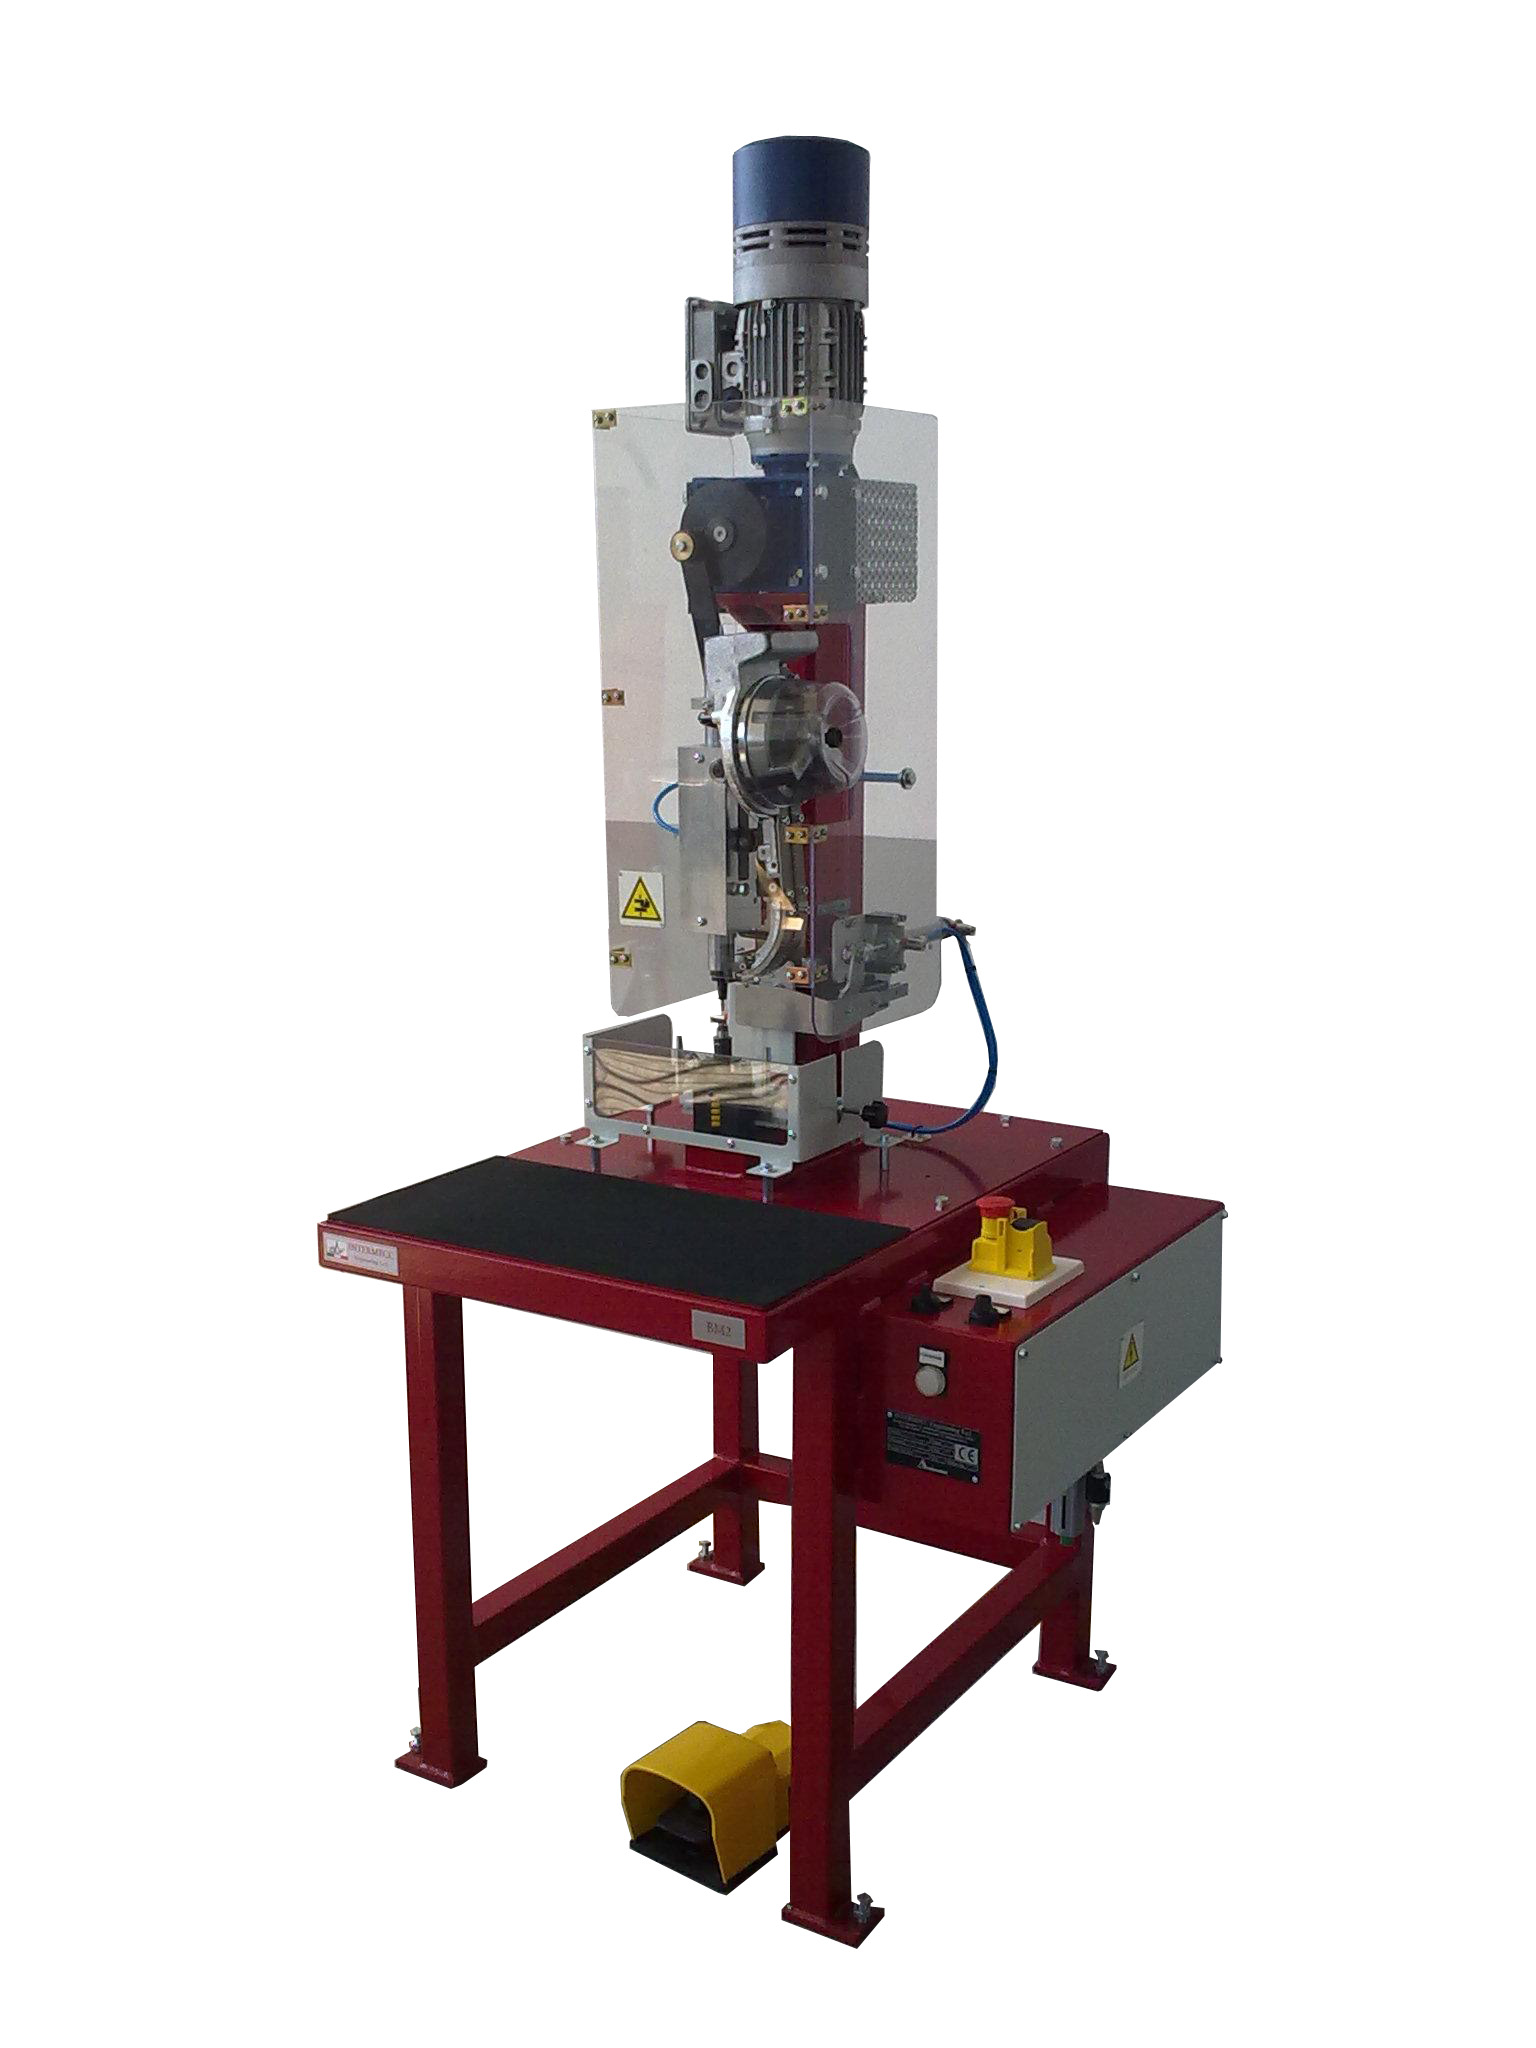  MANUAL RIVETING MACHINE (1 AND 2 RIVETS) WITH AUTOMATIC CENTERING DEVICE